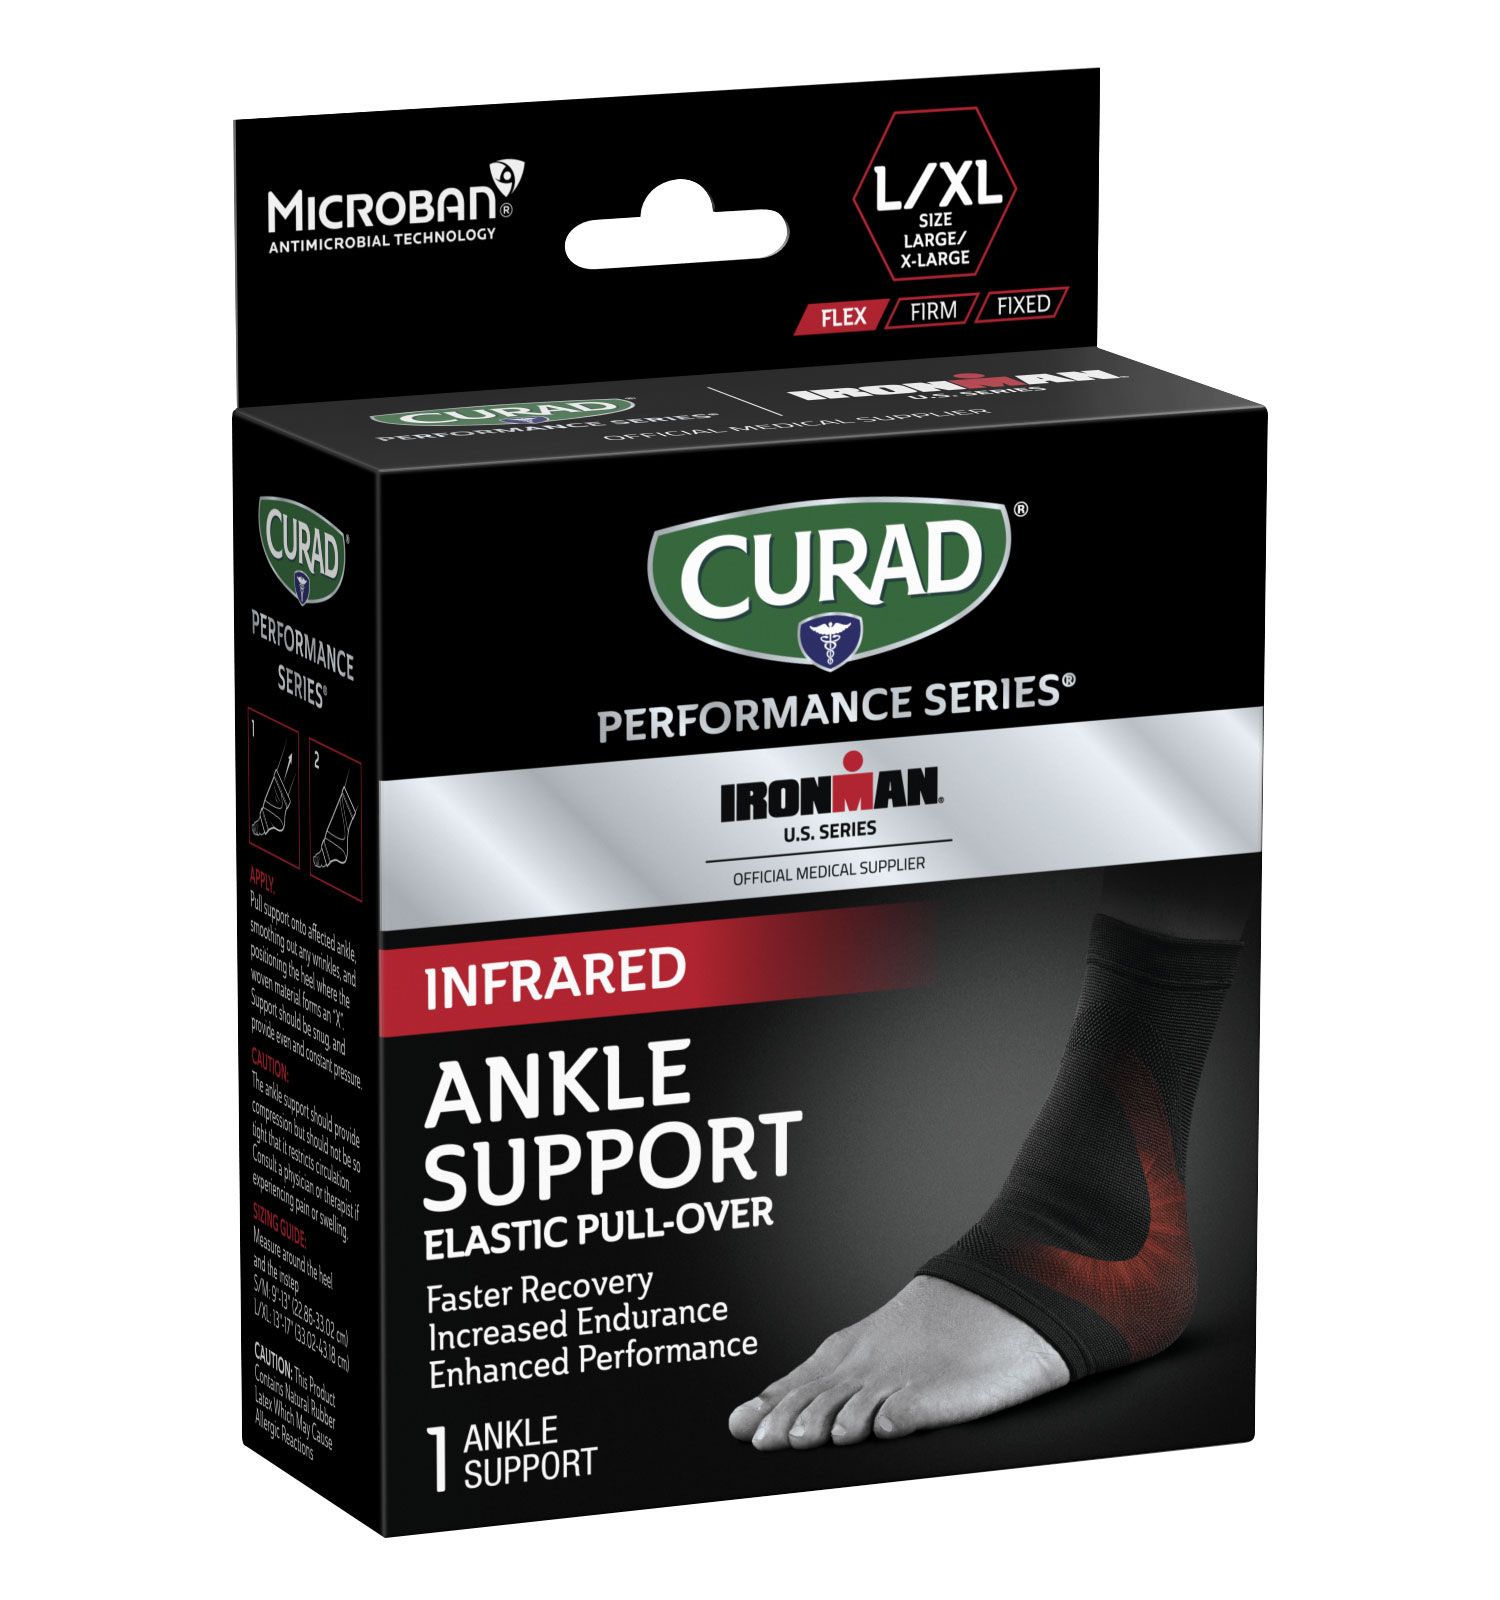 CURAD Performance Series IRONMAN Infrared Ankle Support, Elastic